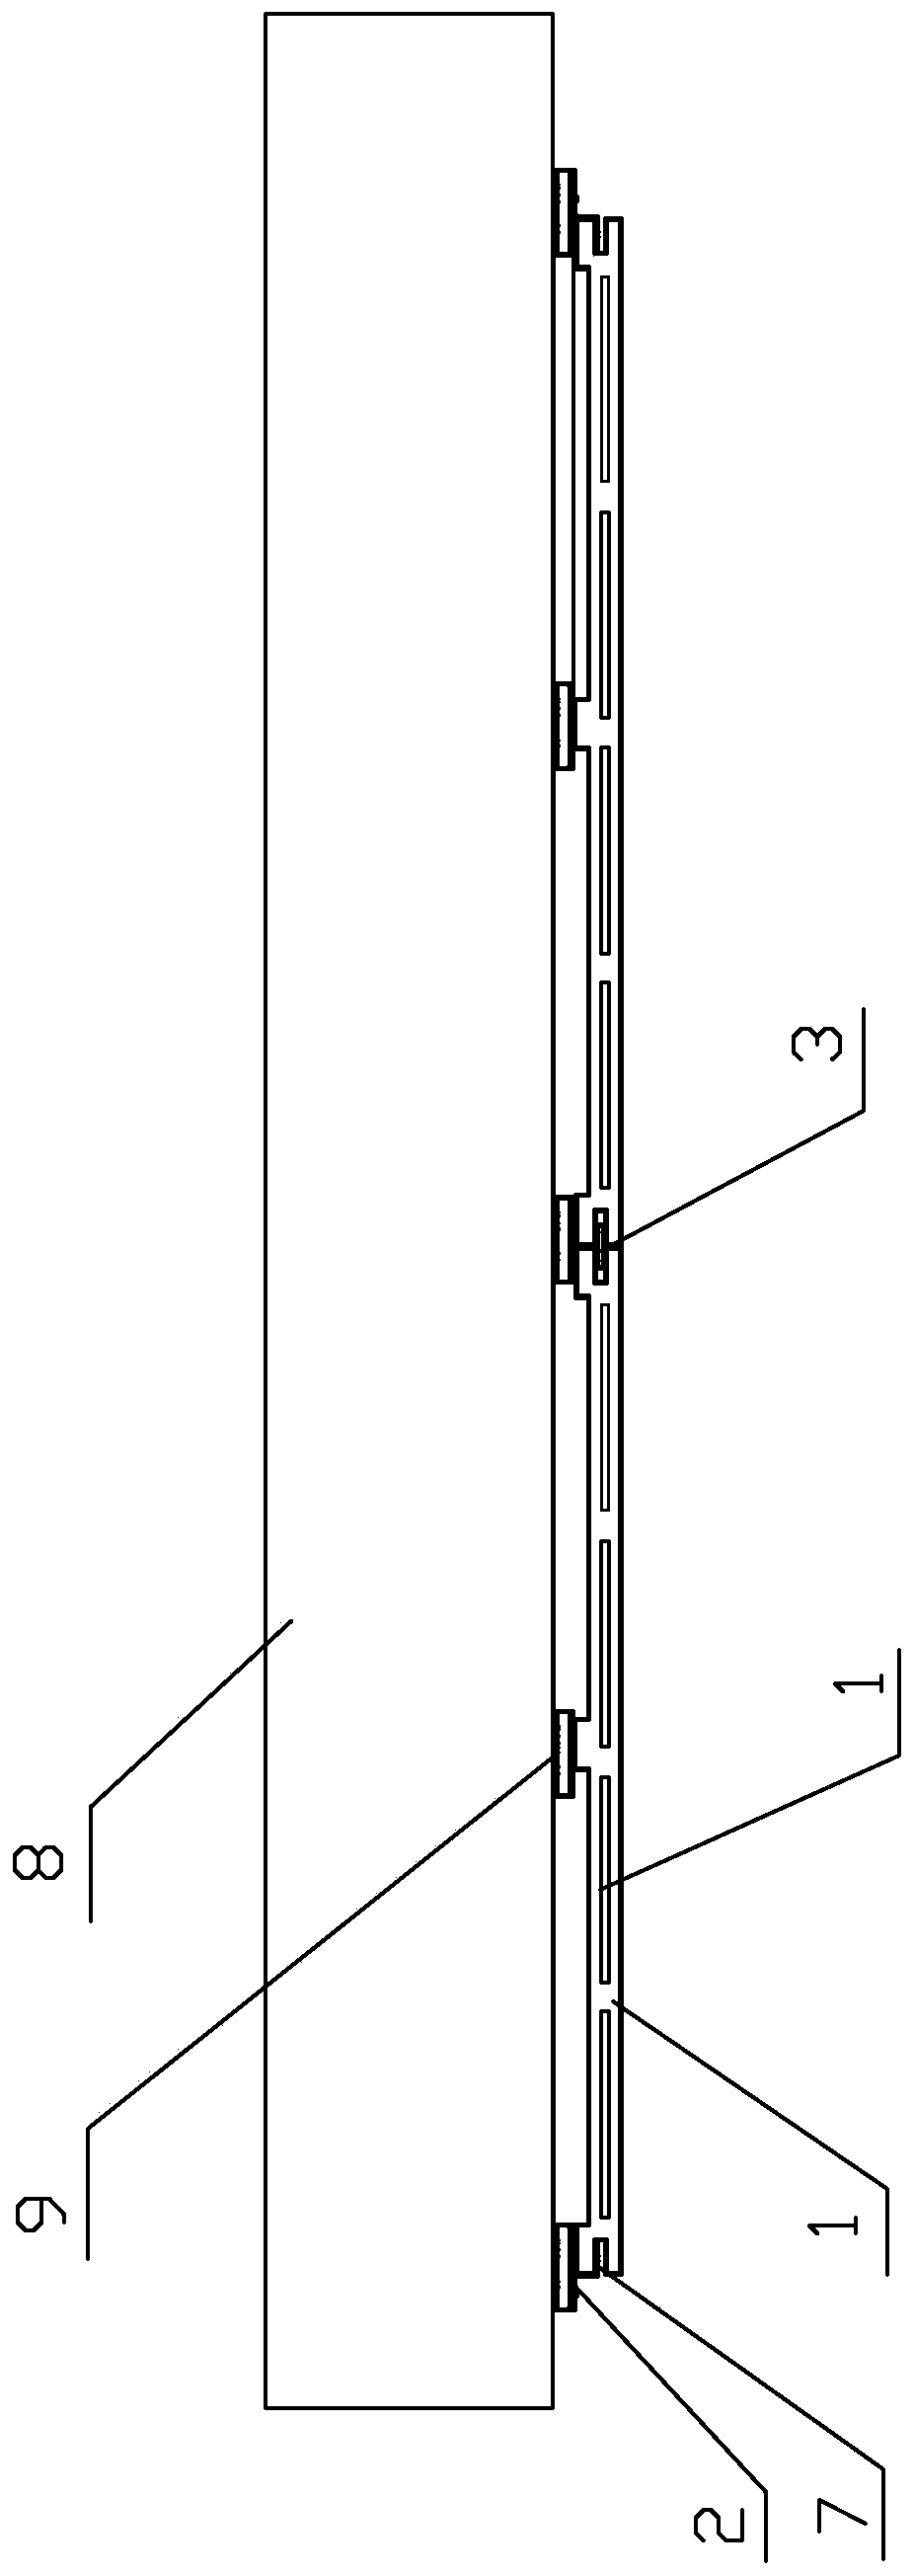 Wallboard mounting structure and mounting method thereof